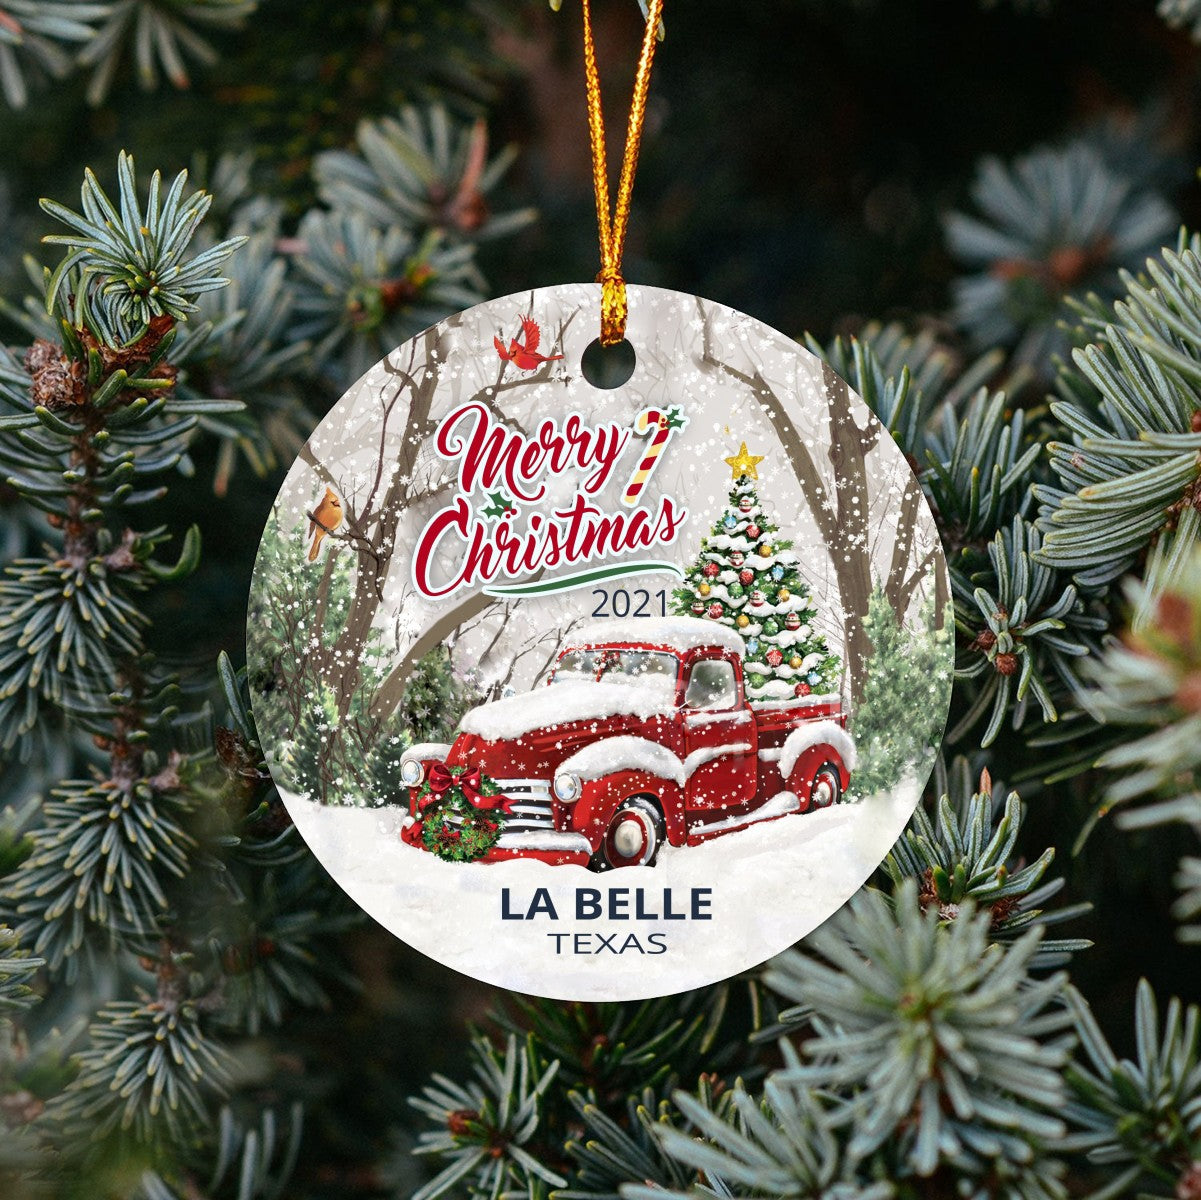 Christmas Tree Ornaments La Belle - Ornament With Name City, State La Belle Texas TX Ornament - Red Truck Xmas Ornaments 3'' Plastic Gift For Family, Friend And Housewarming